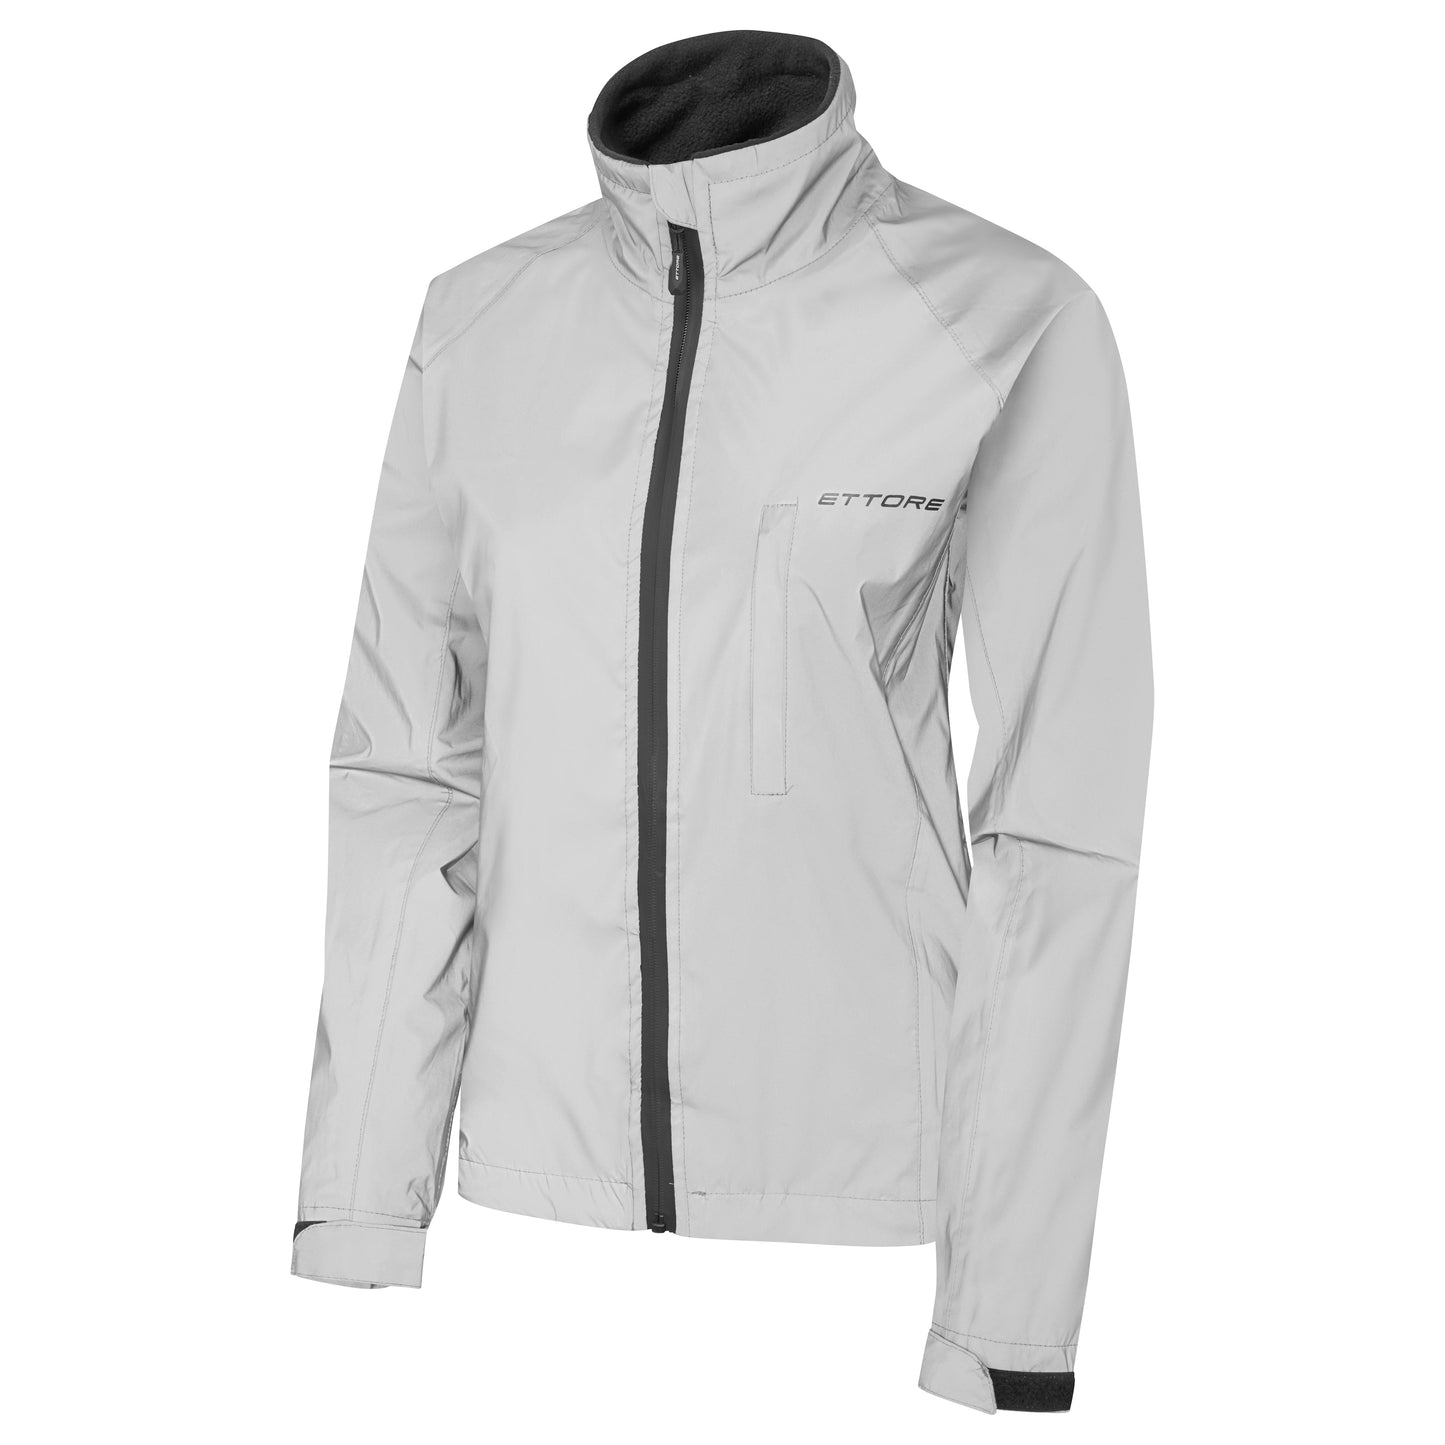 Ettore Night Glow Ladies Waterproof Breathable High Visibility Reflective Silver Cycling Jacket